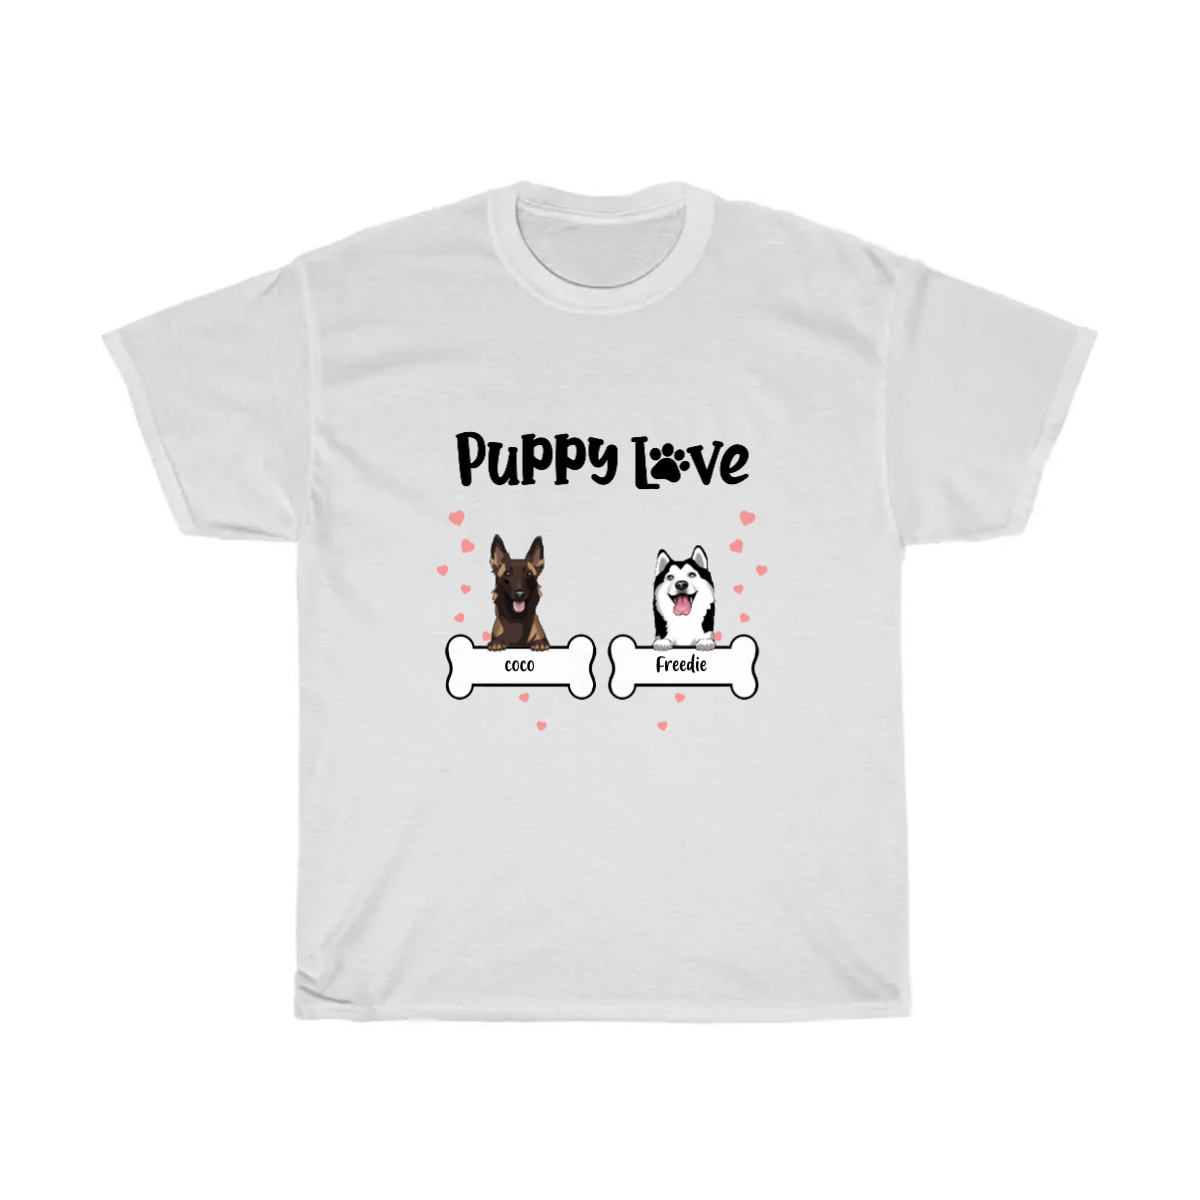 Unisex Heavy Cotton T-Shirt for puppy lovers - Live personalized preview at our online store